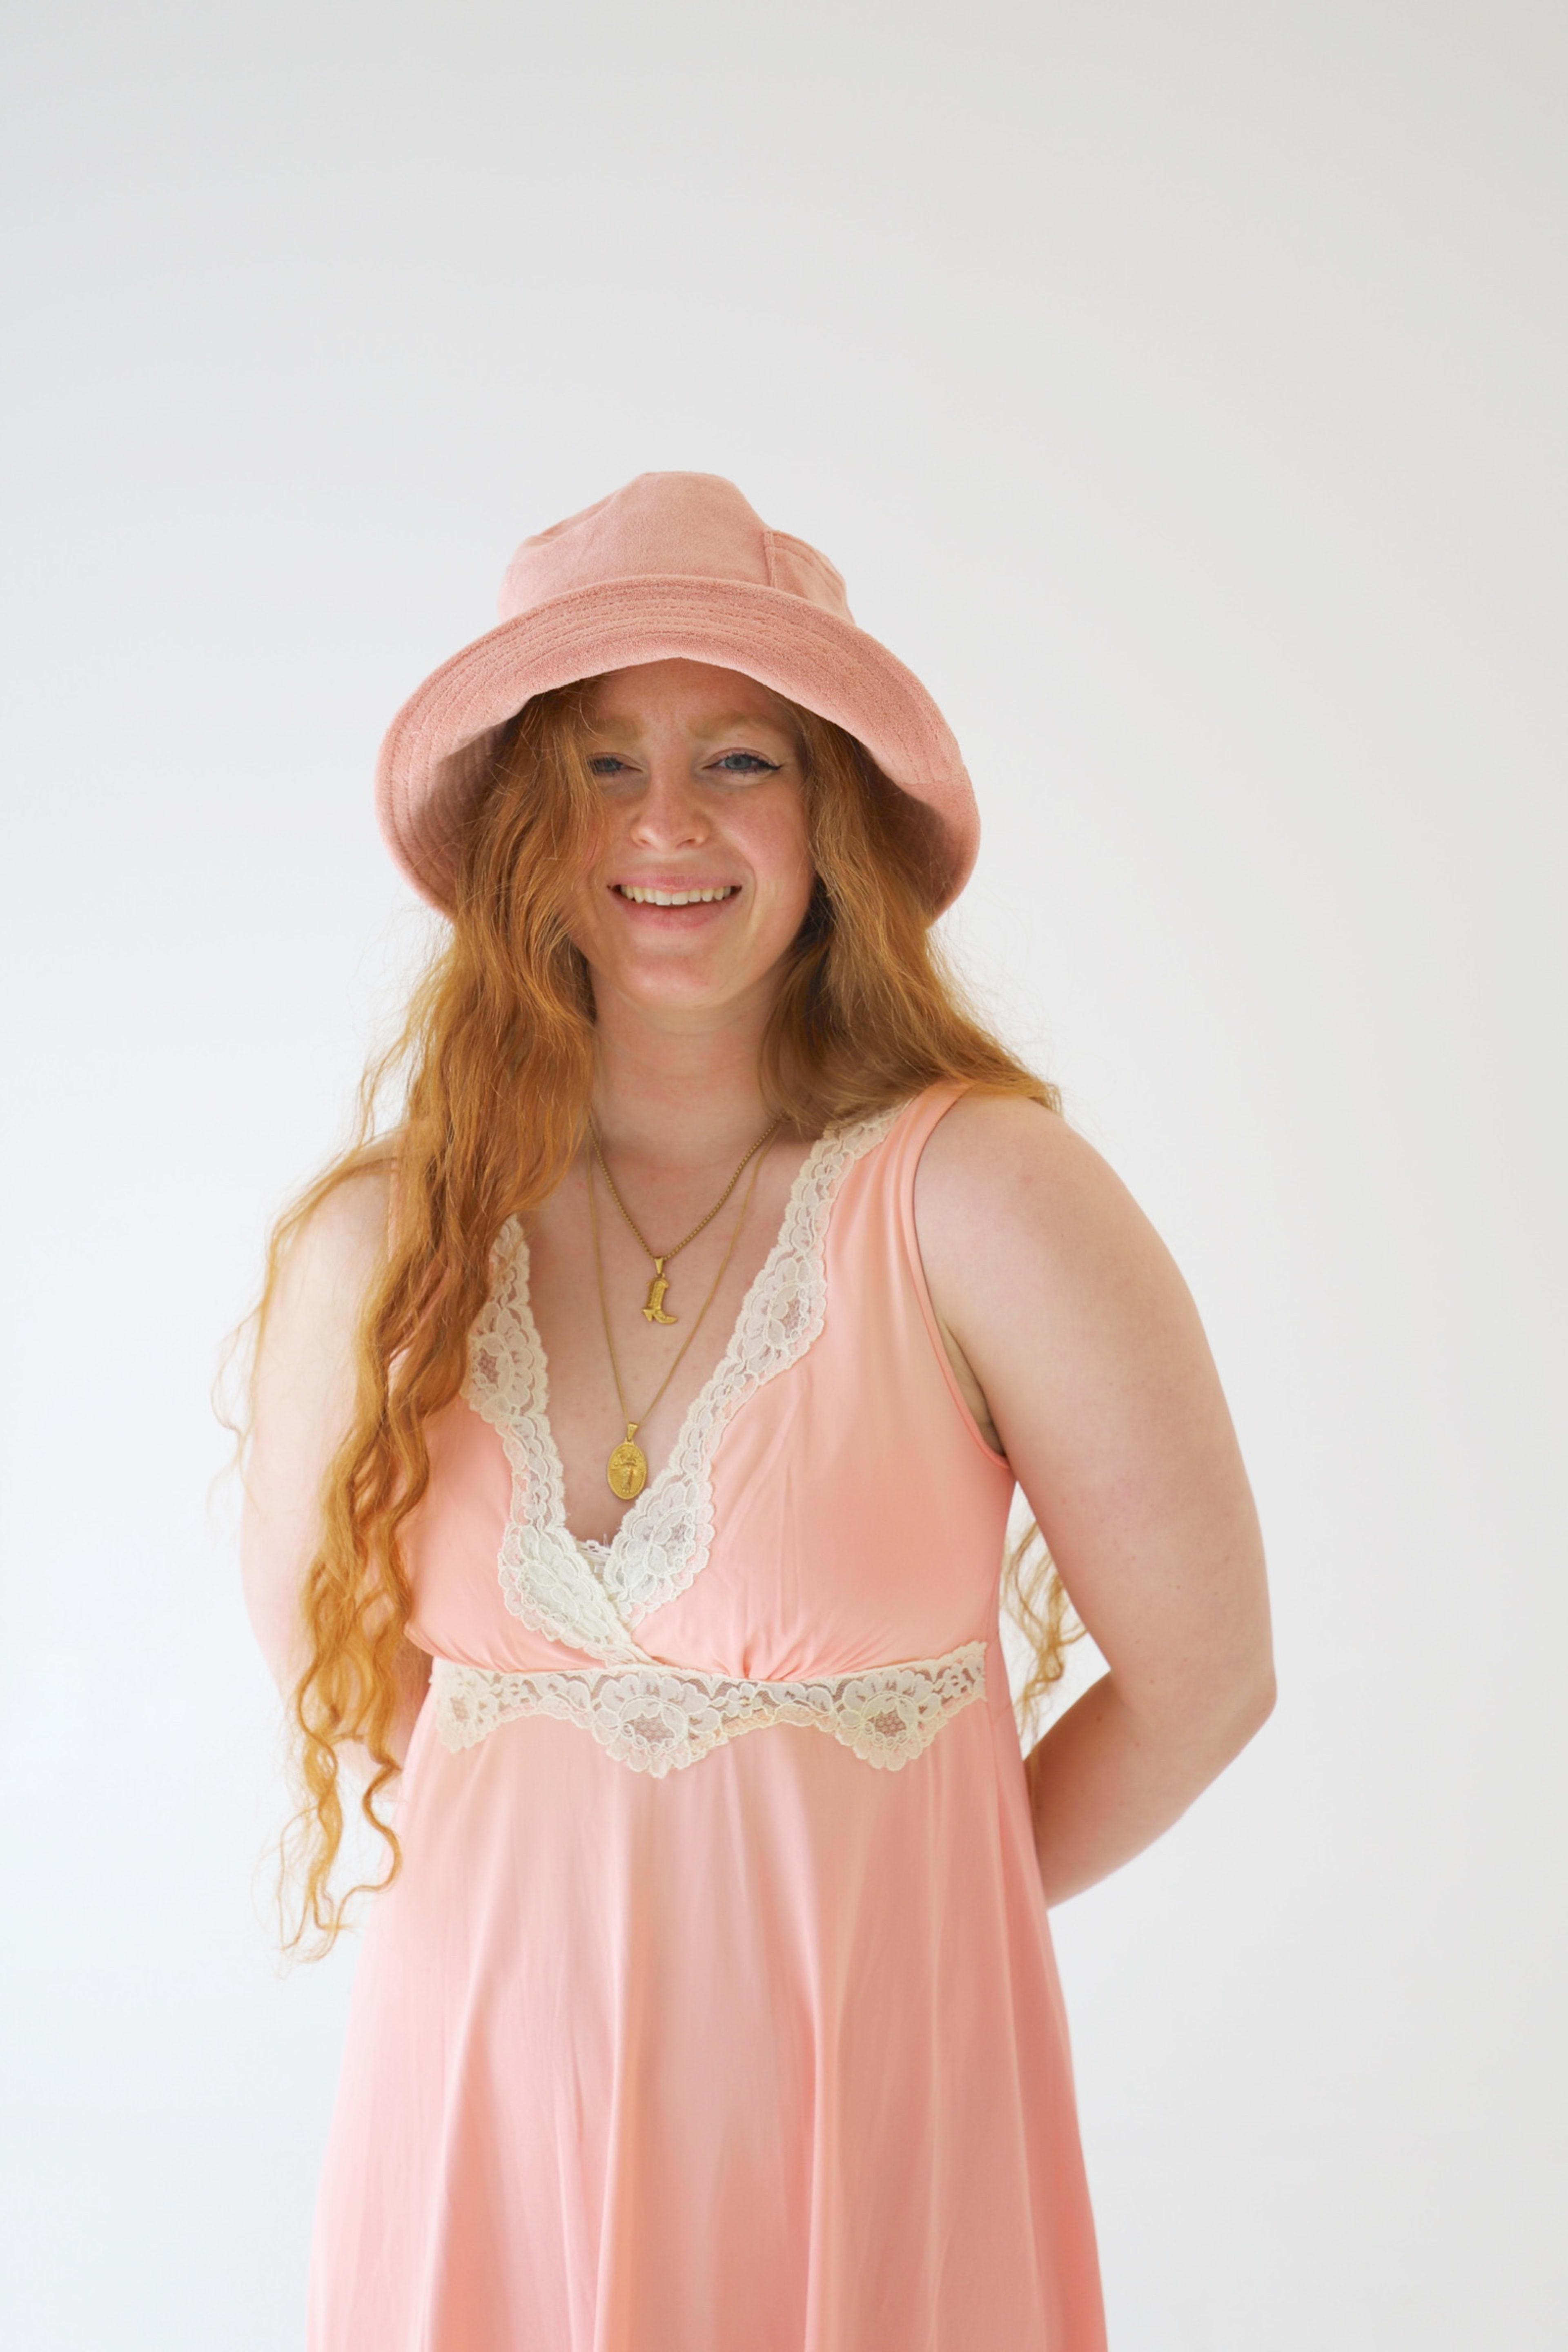 A fashion photo shoot featuring a woman in a pink dress and hat.